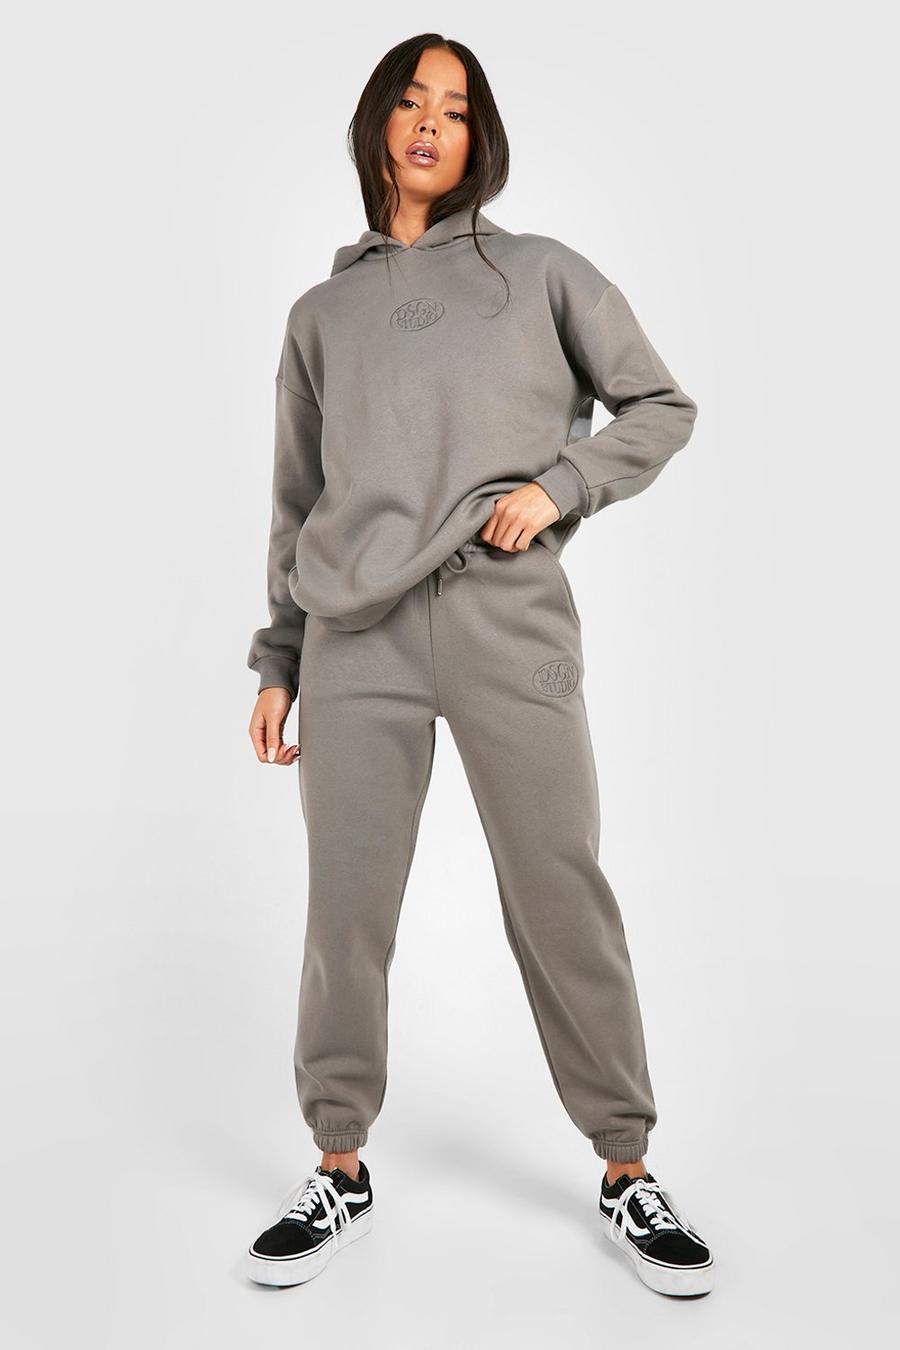 Charcoal grey Petite Embroidery Dsgn Hoody & Track Pants Tracksuit